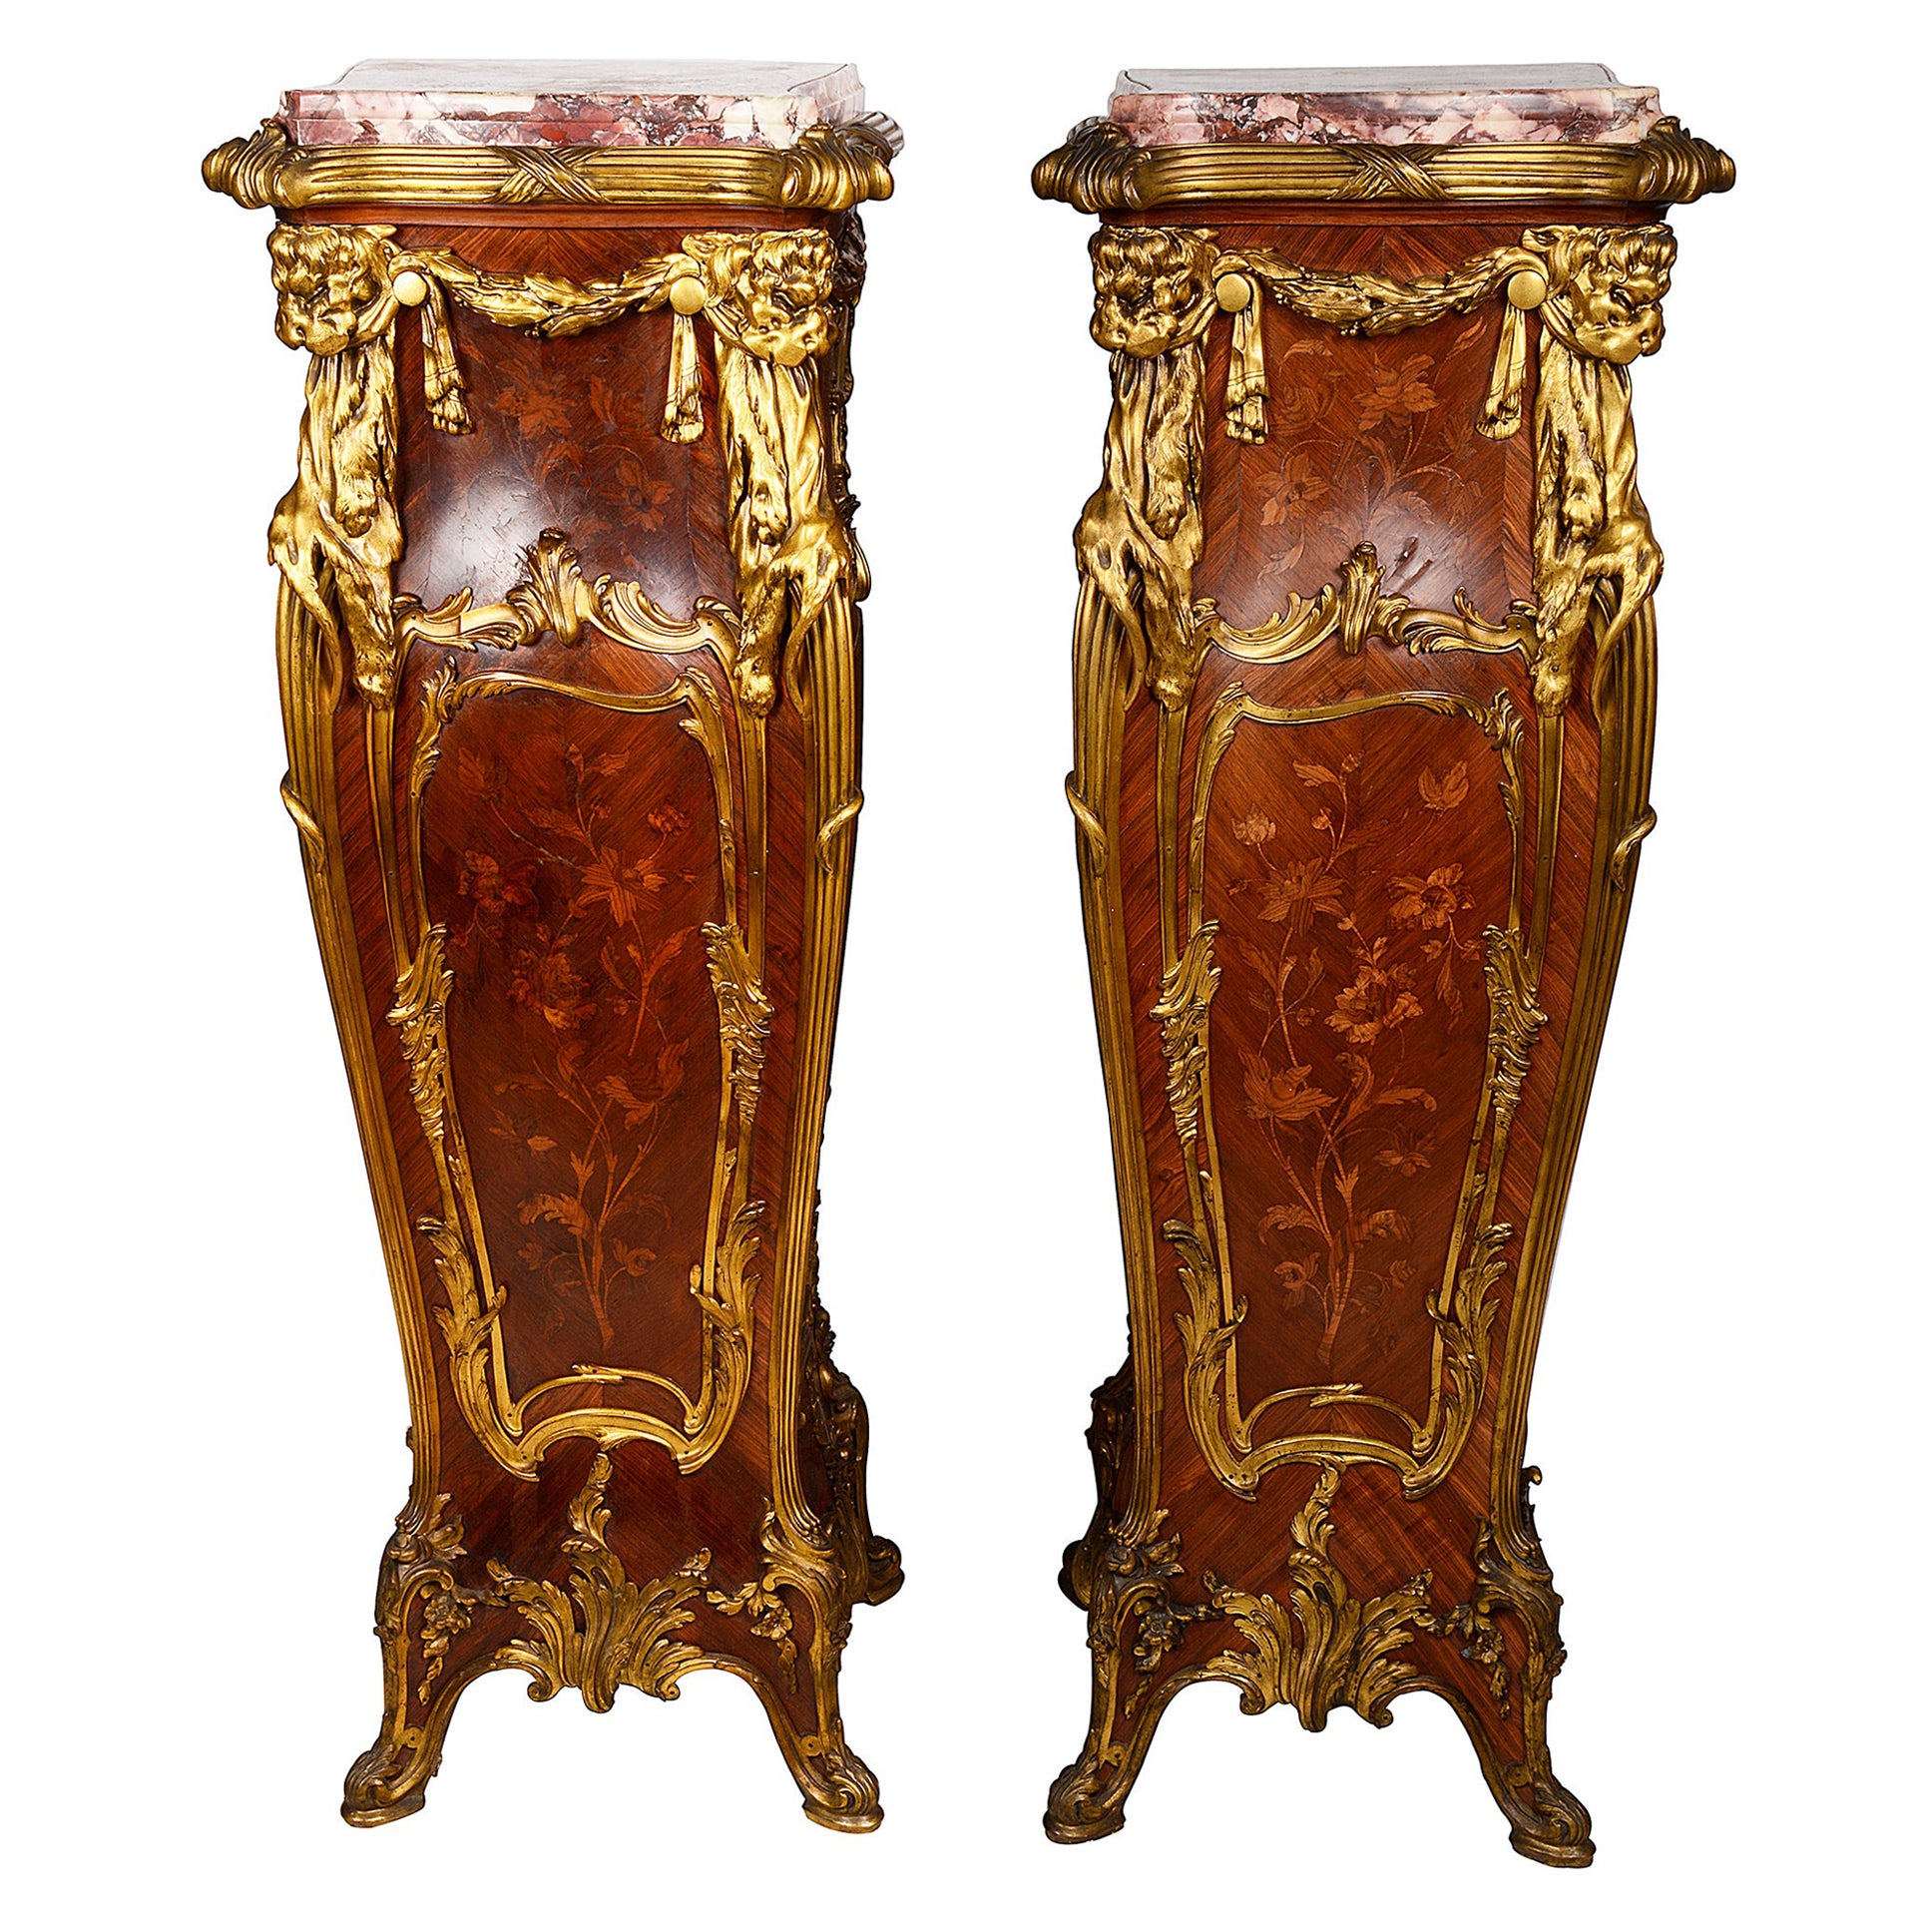 A fine quality and rare pair of late 19th century French Louis XVI style pedestals by Francoise Linke. 
Each having their original marble tops, wonderful gilded ormolu mounts depicting ribbons, swags, Lion masks and rococo mouldings. Inset floral